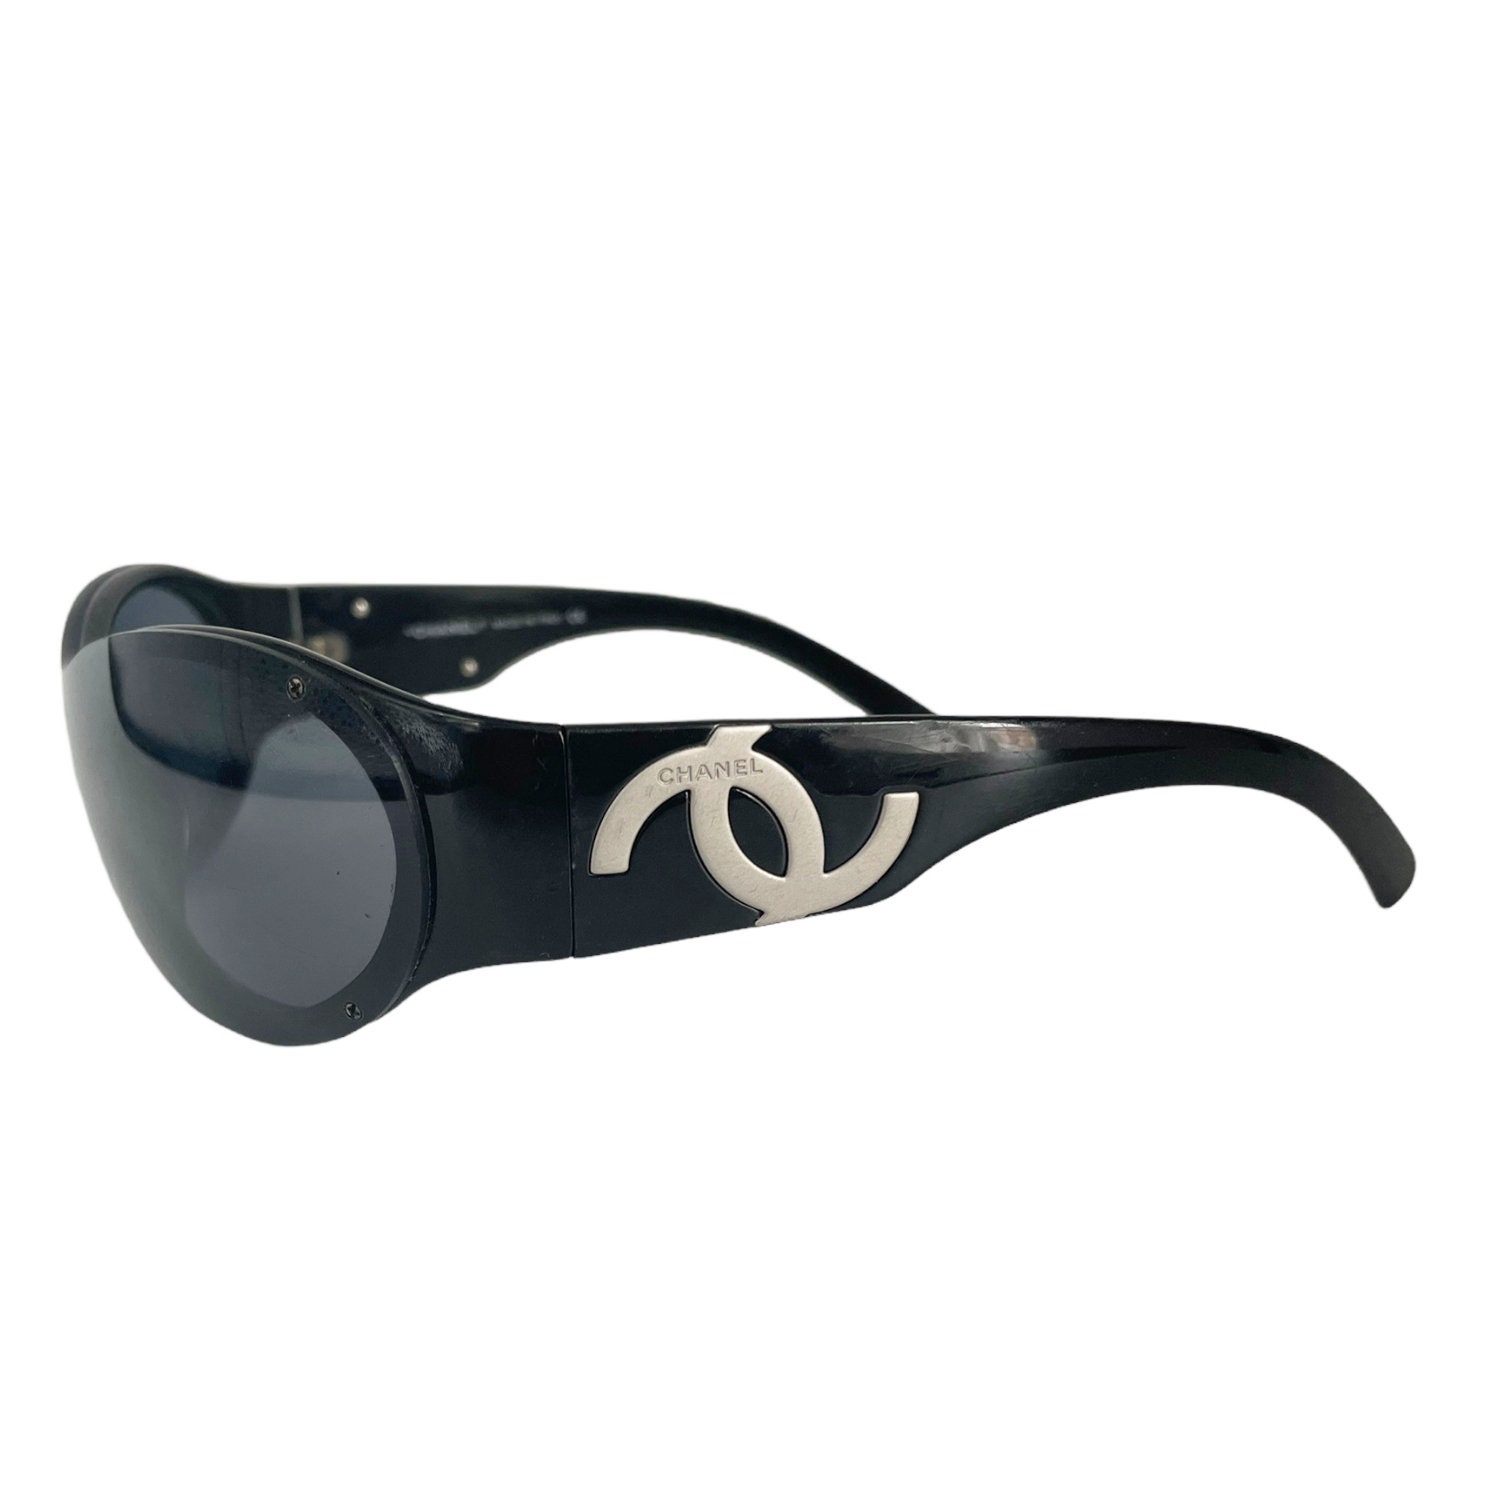 Chanel Sunglasses - Authentic Chanel Chunky Logo Sunglasses in black /  silver genuine vintage 2000s